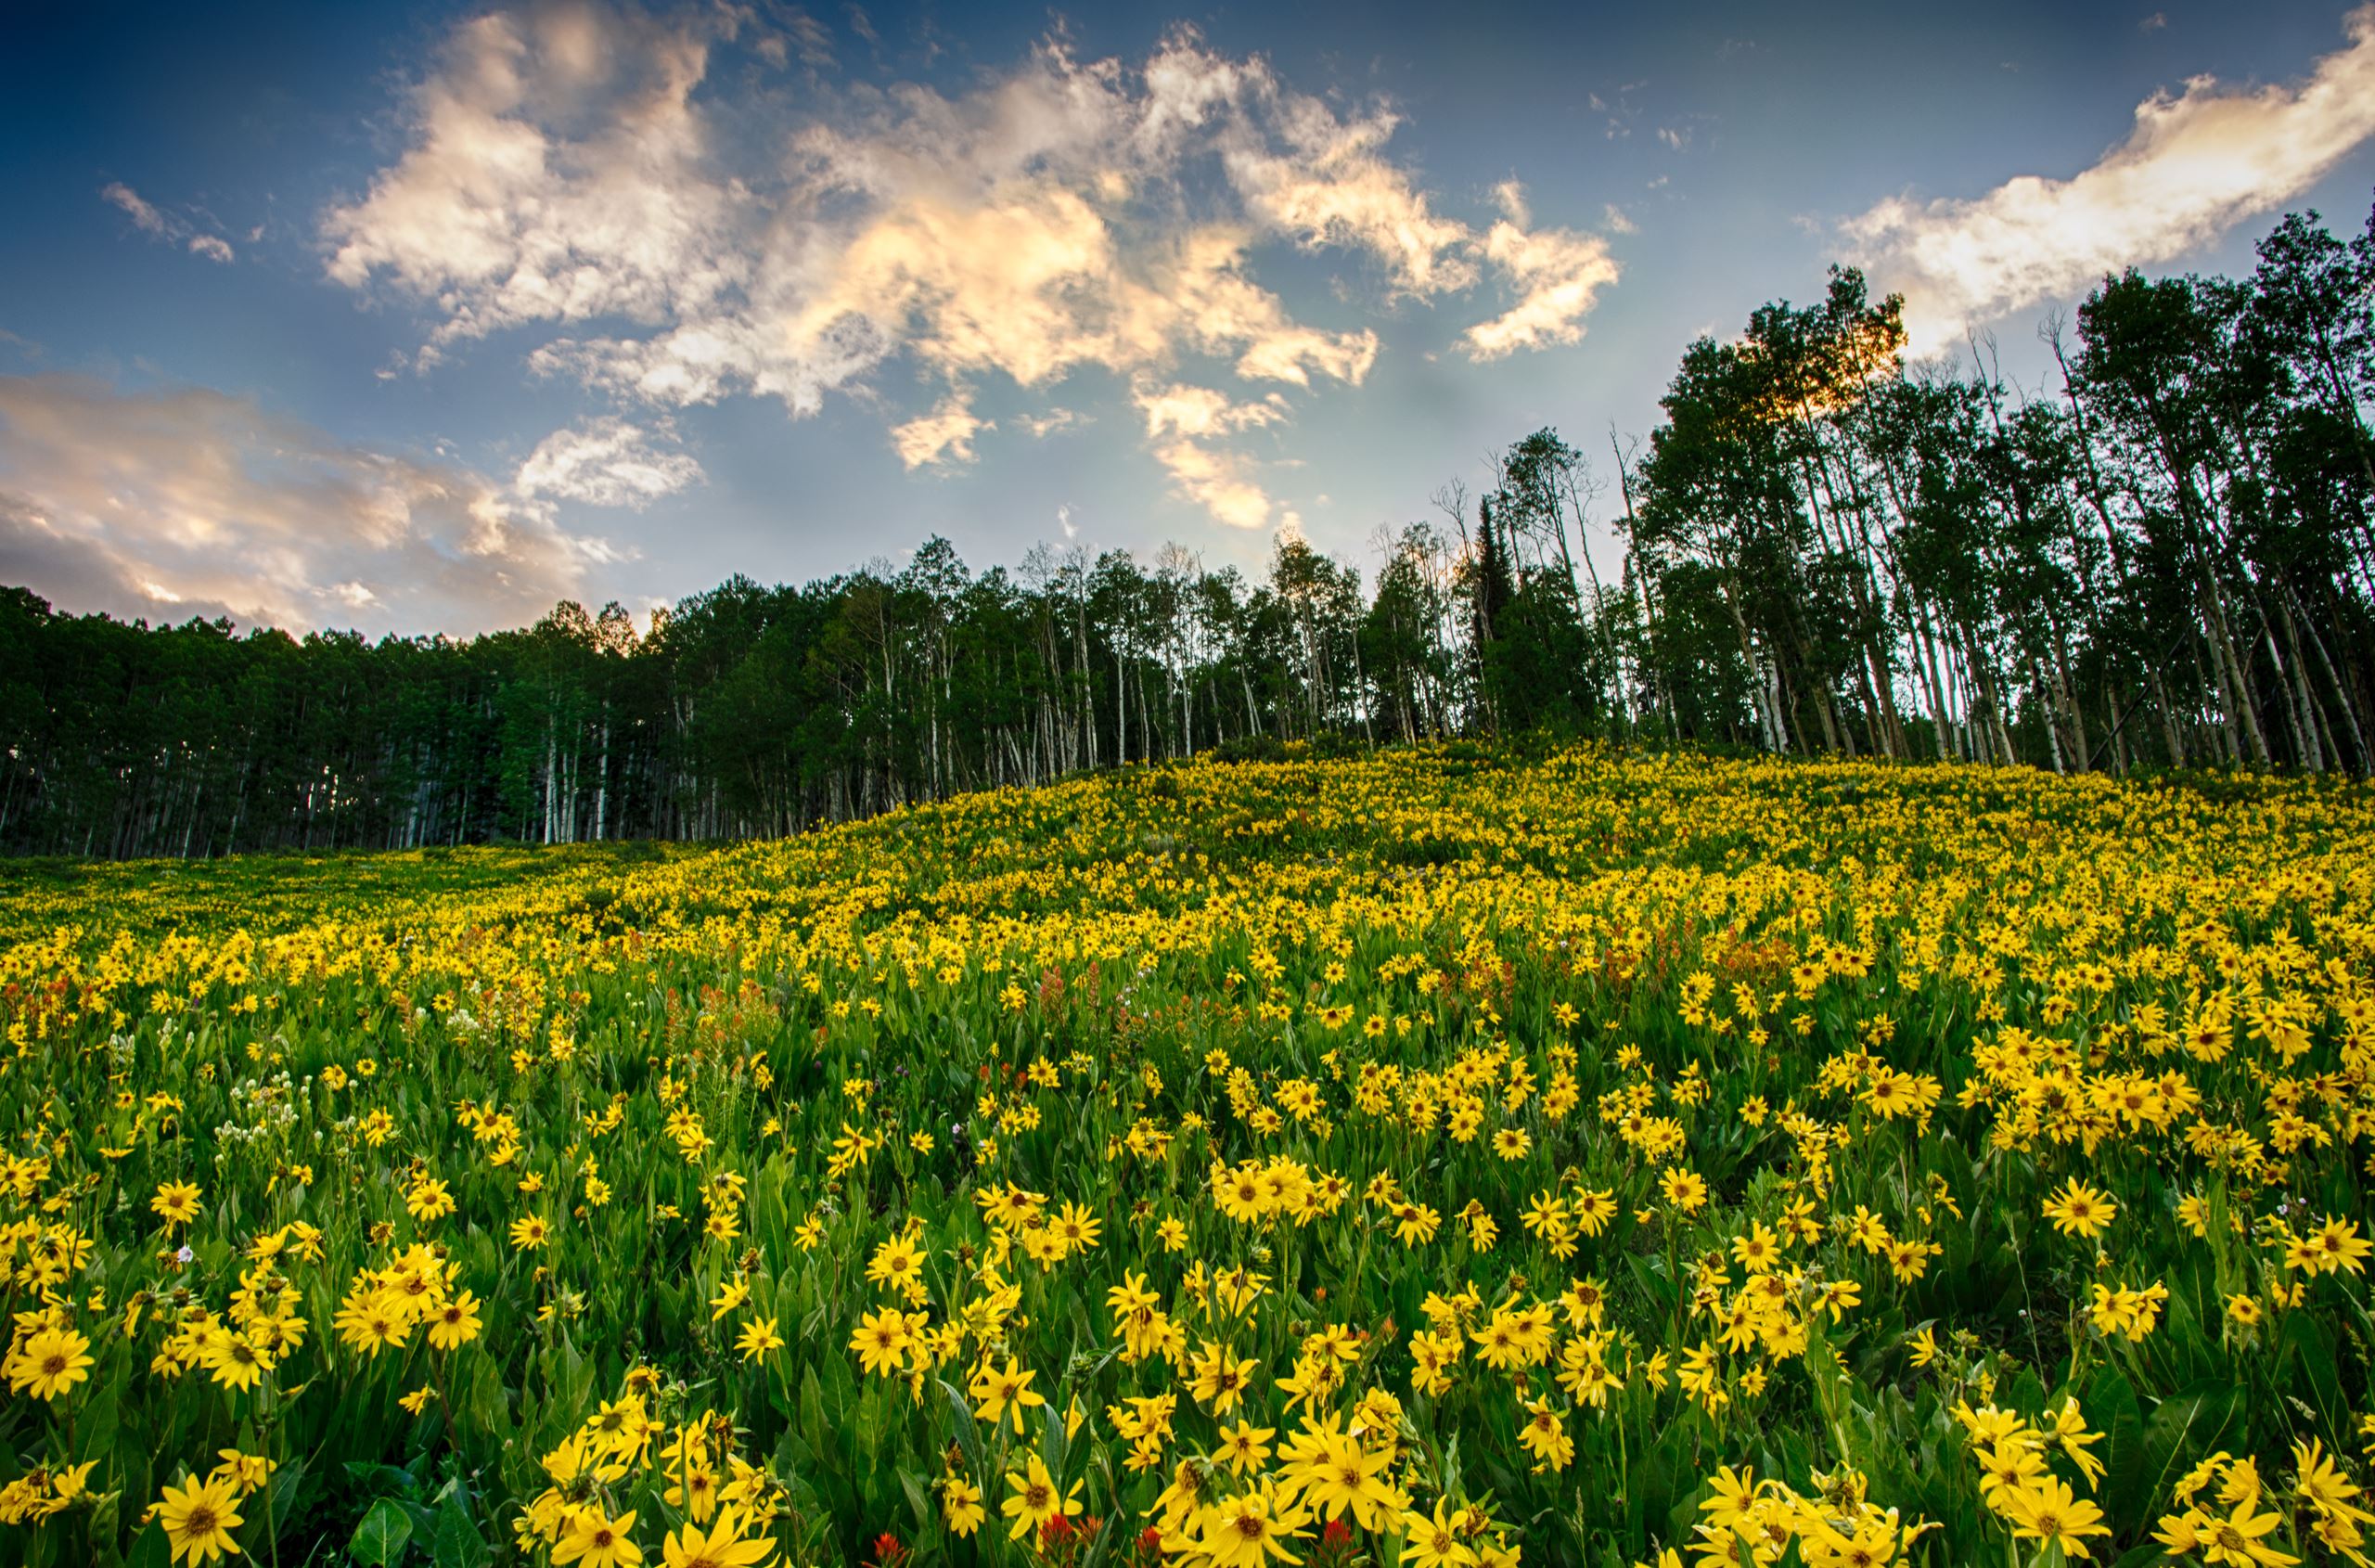 Yellow flowers in a meadow with a blue sky in the background